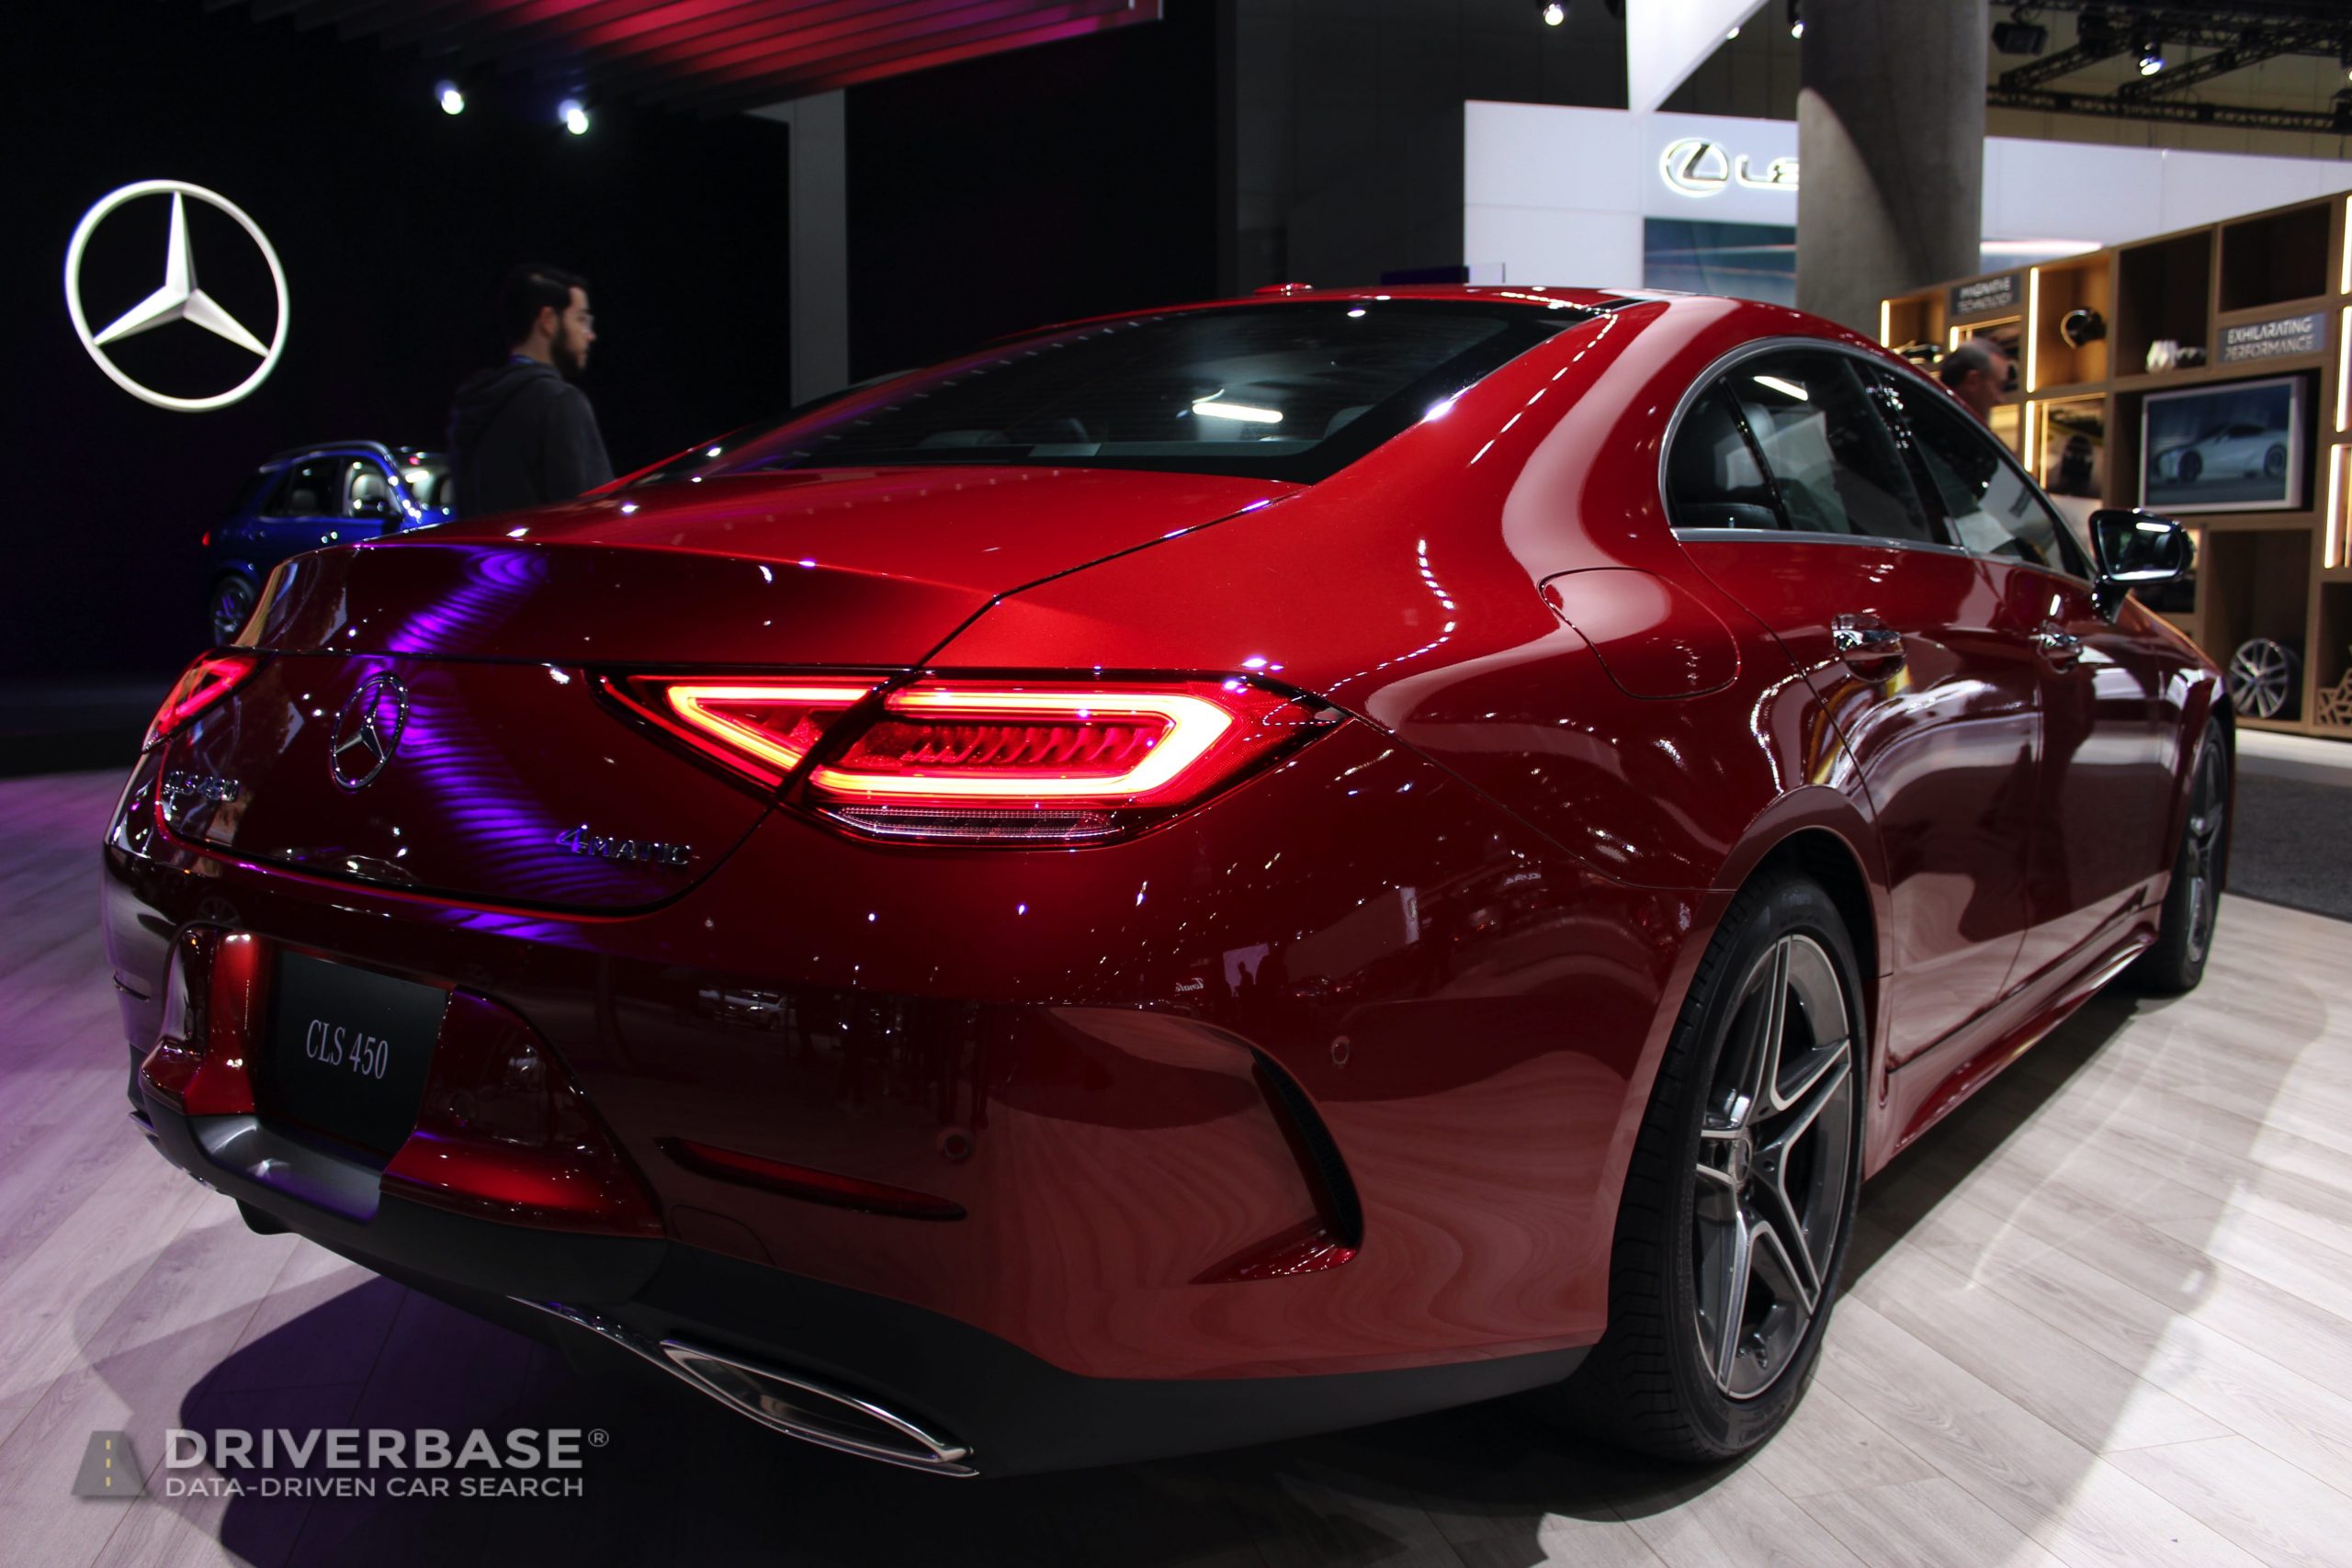 2020 Mercedes-Benz CLS 450 at the 2019 Los Angeles Auto Show